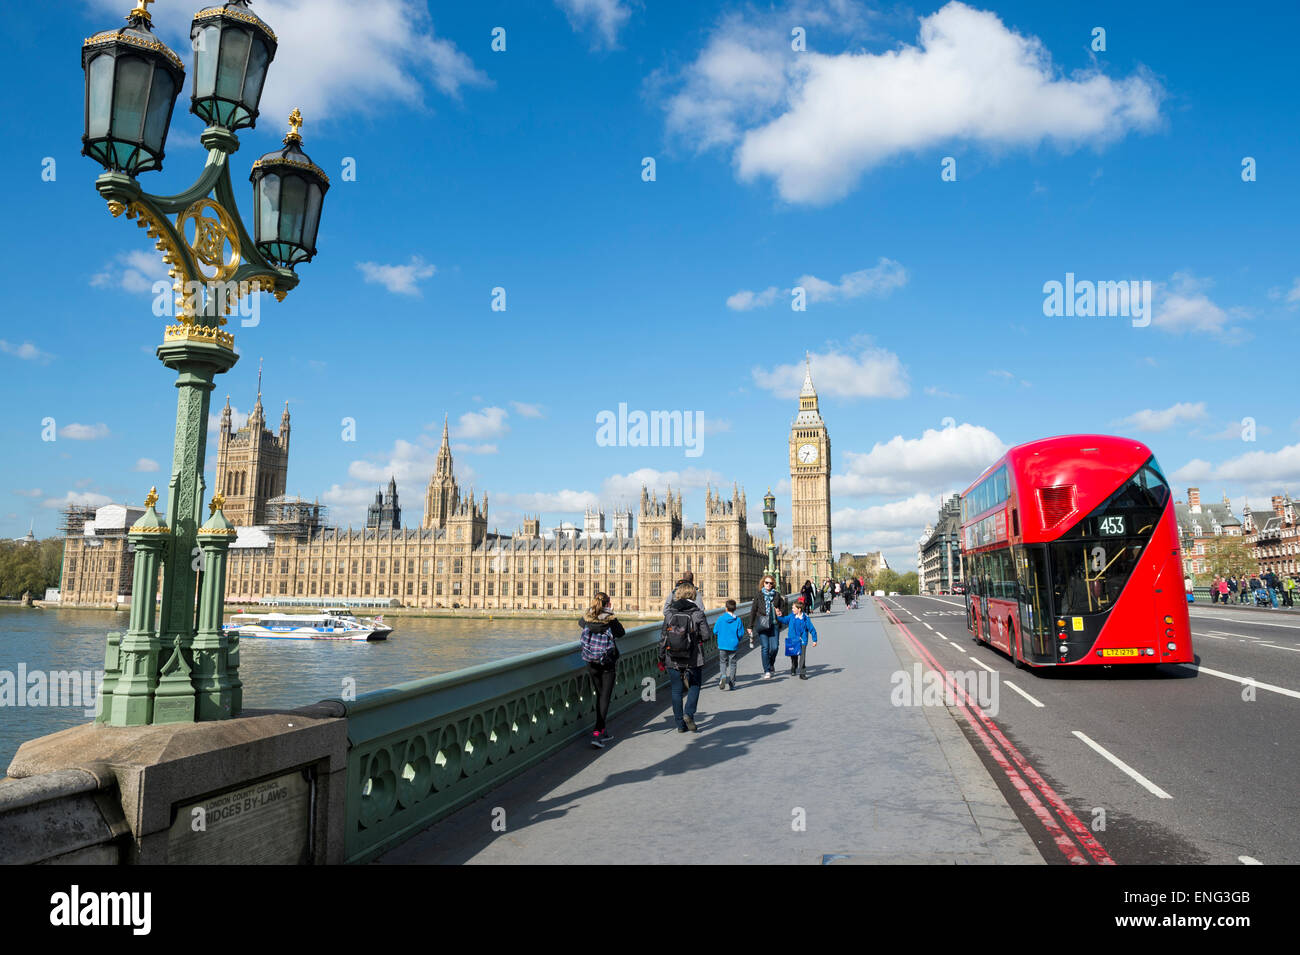 LONDON, UK - APRIL 27, 2015: Modern double-decker bus passes pedestrians walking in front of Houses of Parliament at Westminster Stock Photo